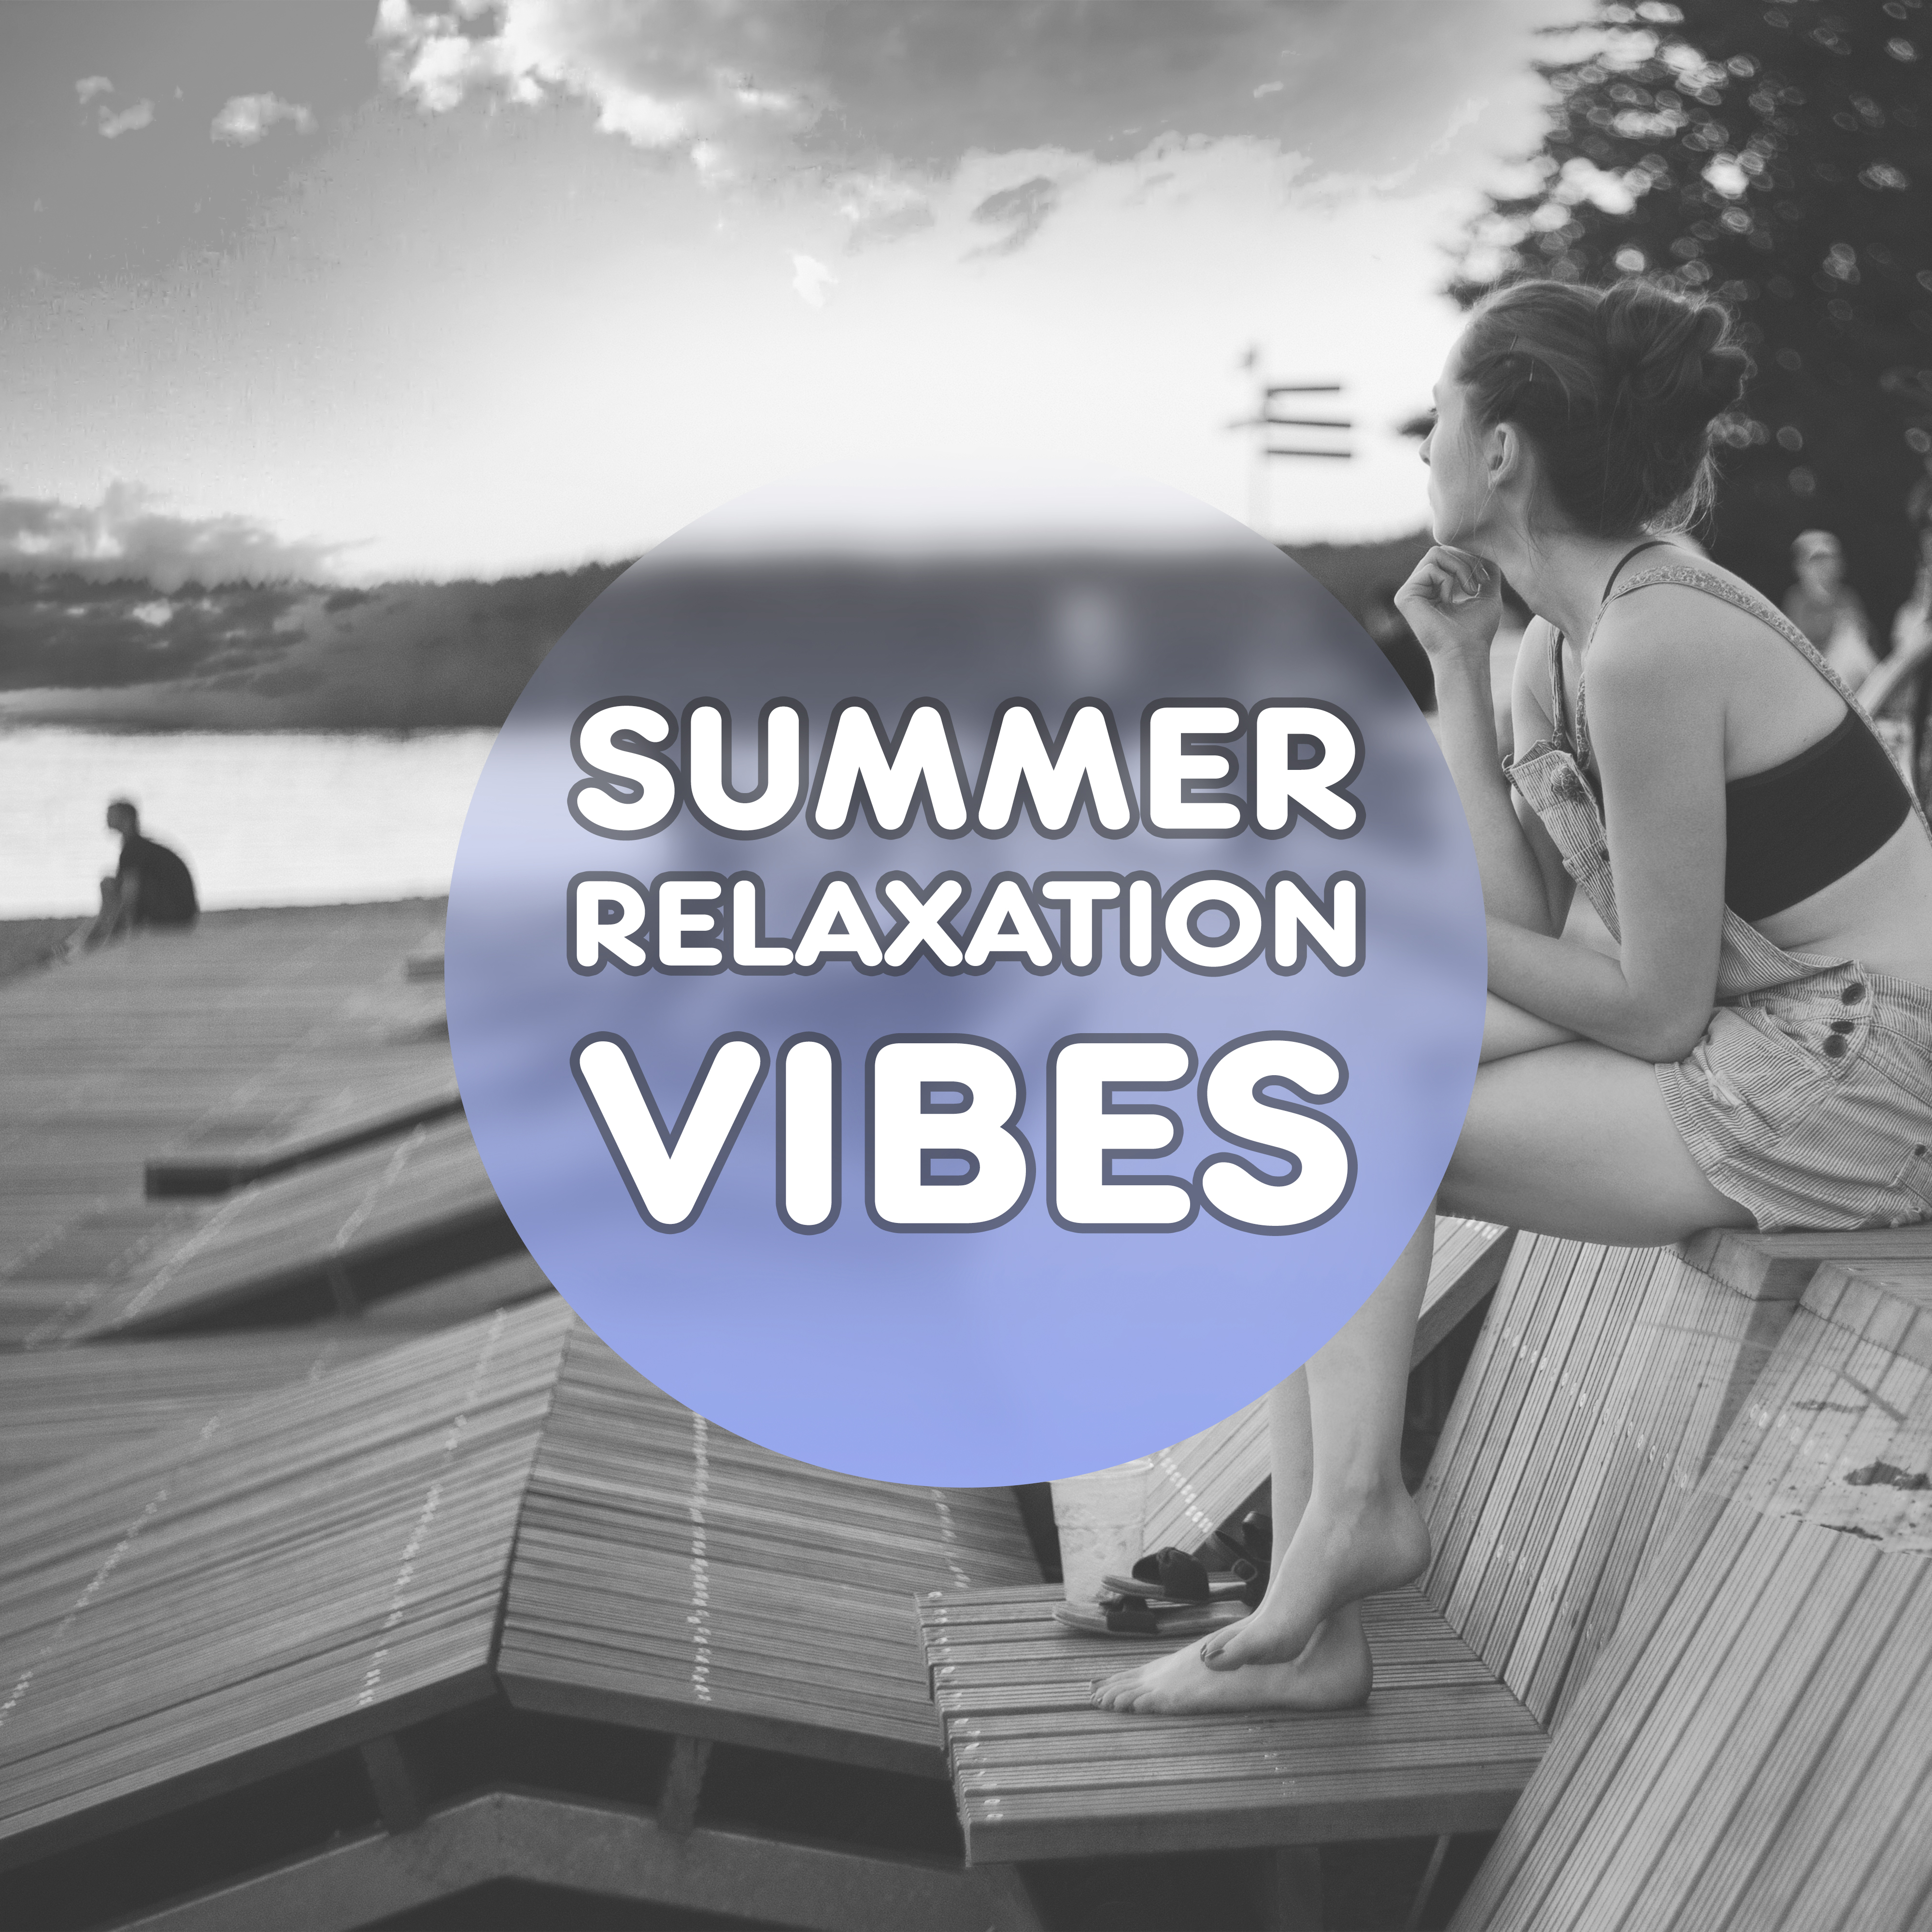 Summer Relaxation Vibes – Beach Relaxation, Tropical Island Music, Chill Out Beats 2017, Easy Way to Relax